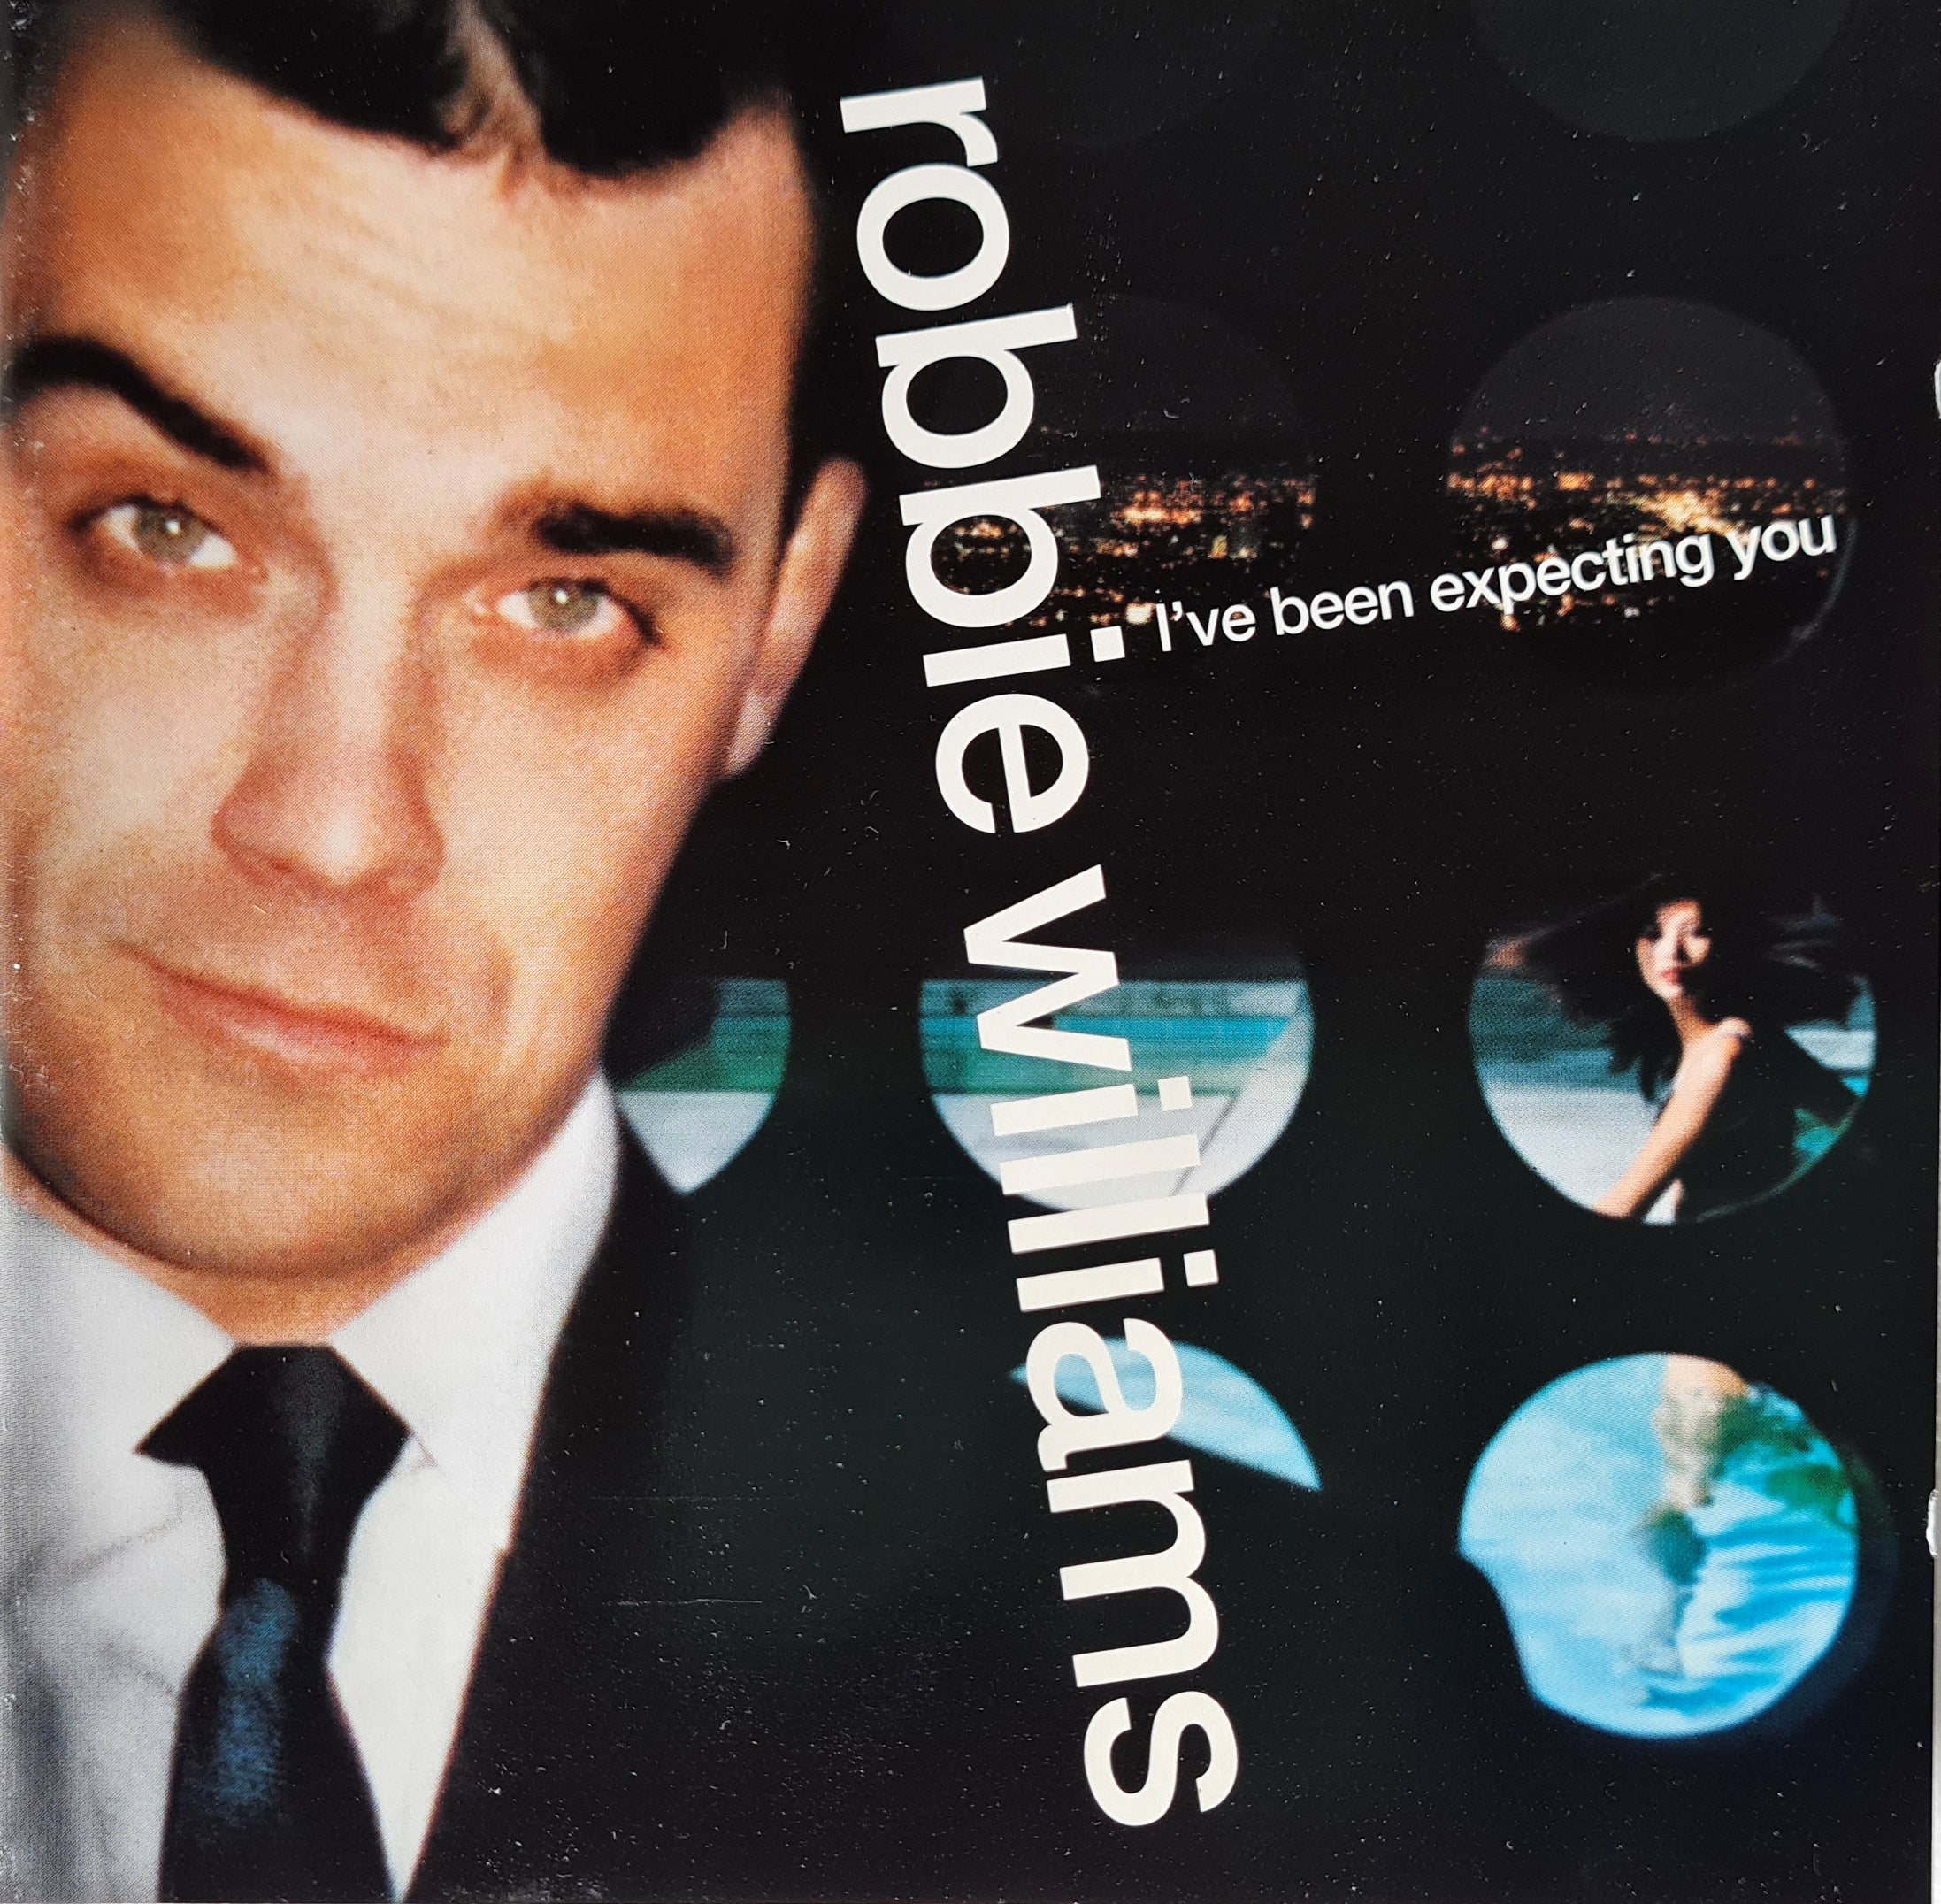 Robbie Williams - I've Been Expecting You (CD)